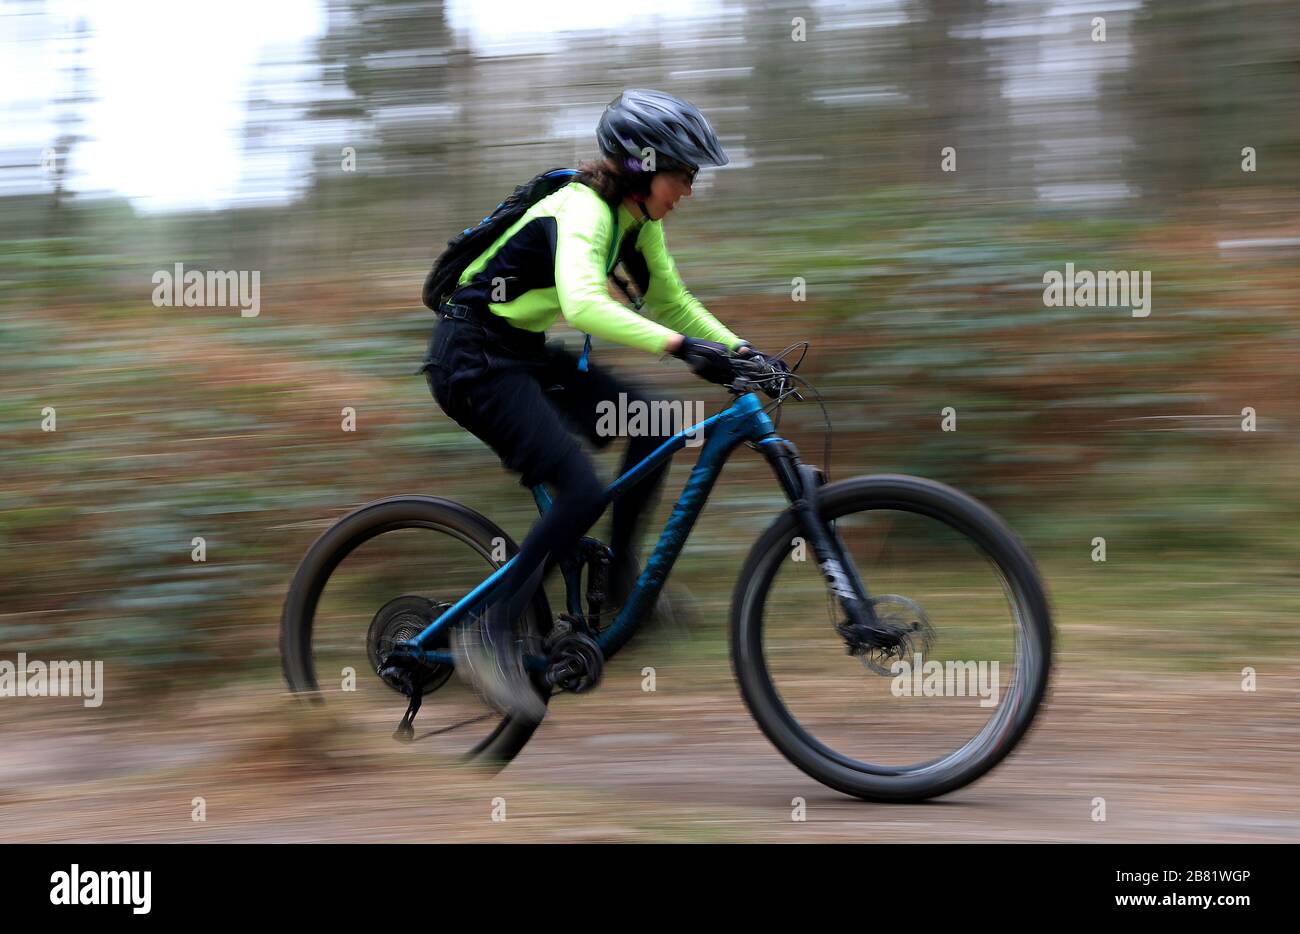 Cyclists follow the trails around Sherwood Pines, Nottingham. NHS England announced that the coronavirus death toll had reached 104 in the UK. Stock Photo